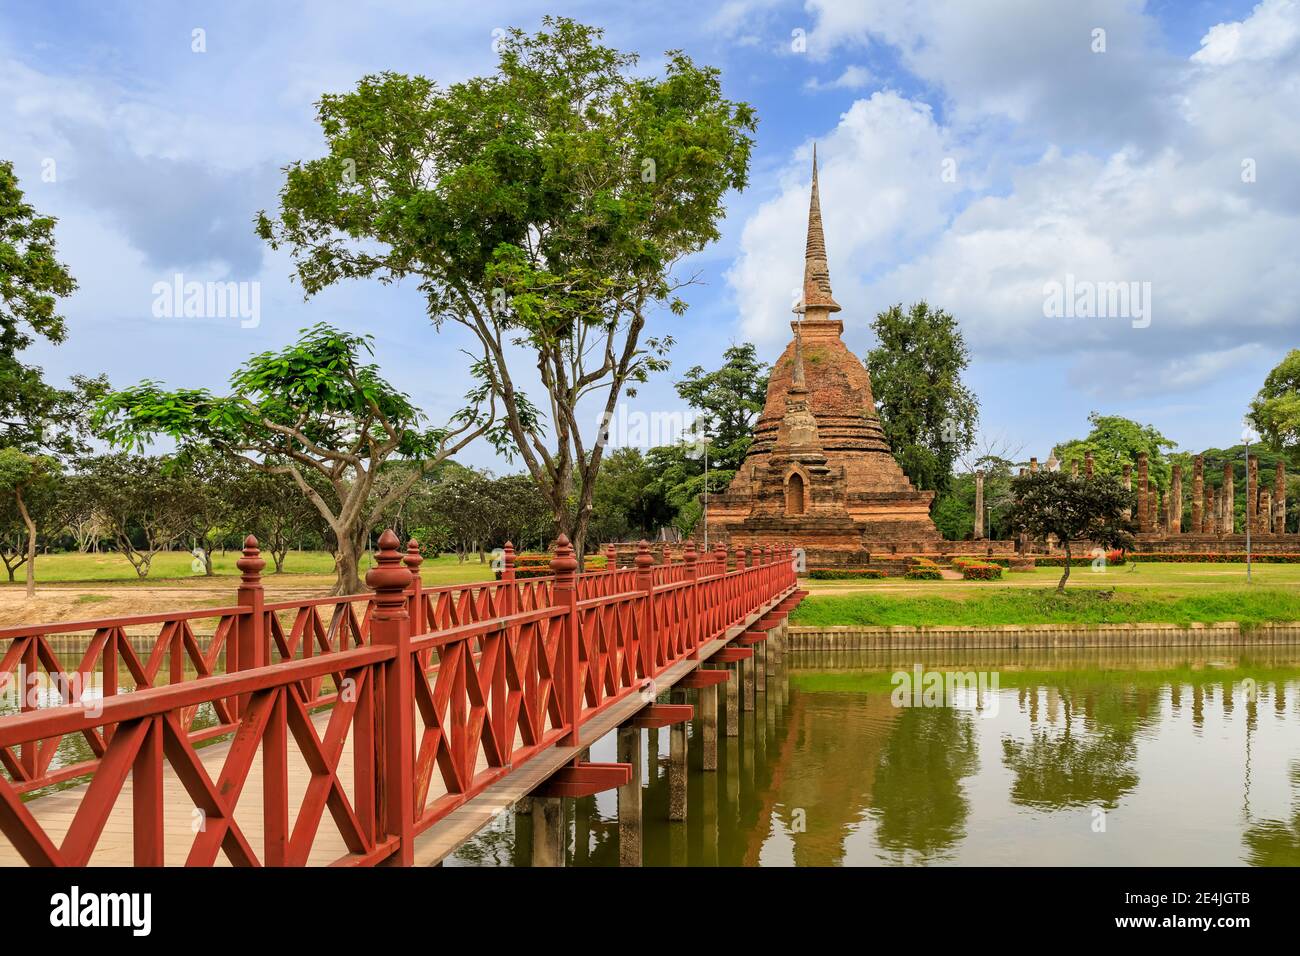 Red wooden bridge across the pond leading to pagoda and ruined monastery complex at Wat Sa Si temple, Sukhothai Historical Park, Thailand Stock Photo